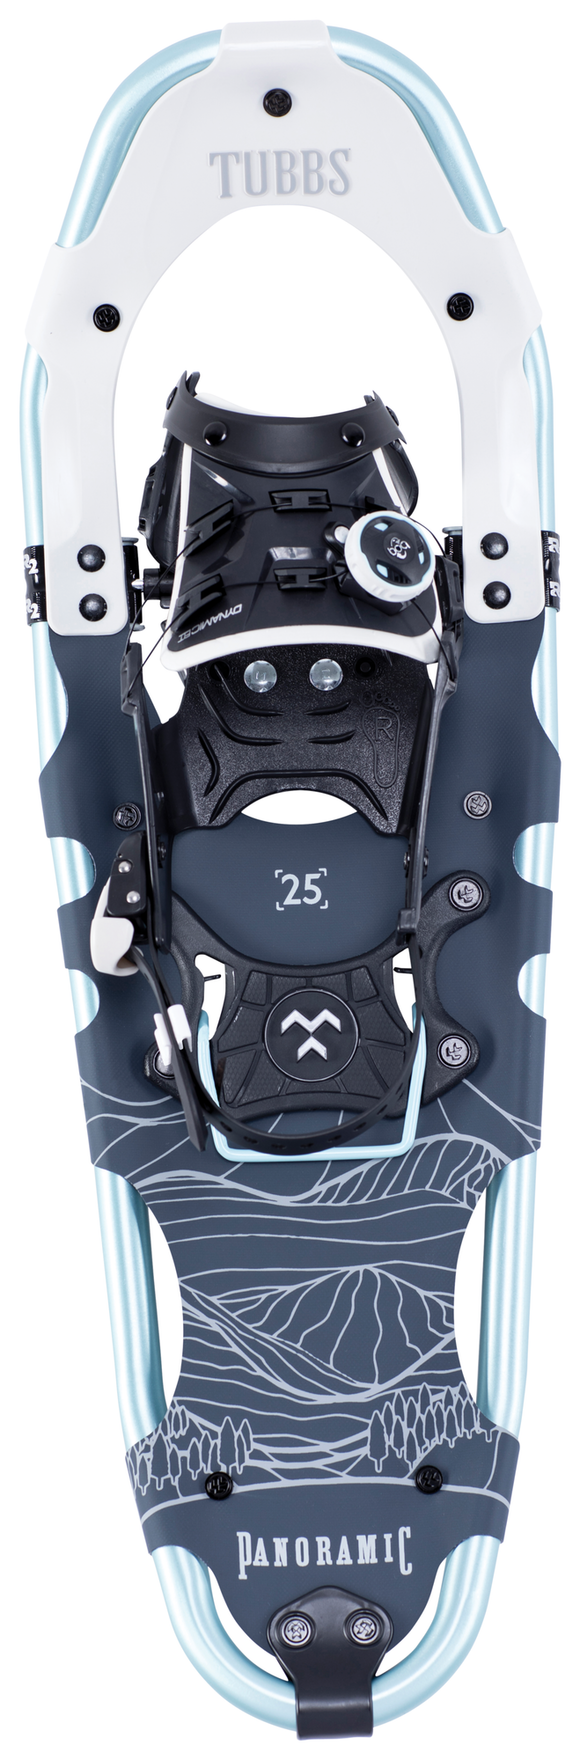 Tubbs Women's Panaramic Snowshoes* In-Store or Pick Up only